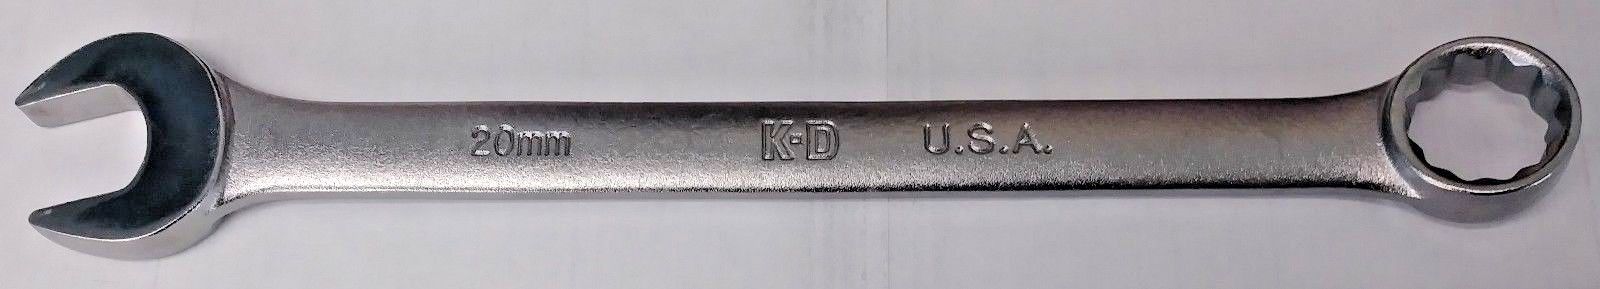 KD Tools 63620 20mm 12 Point Combination Wrench USA